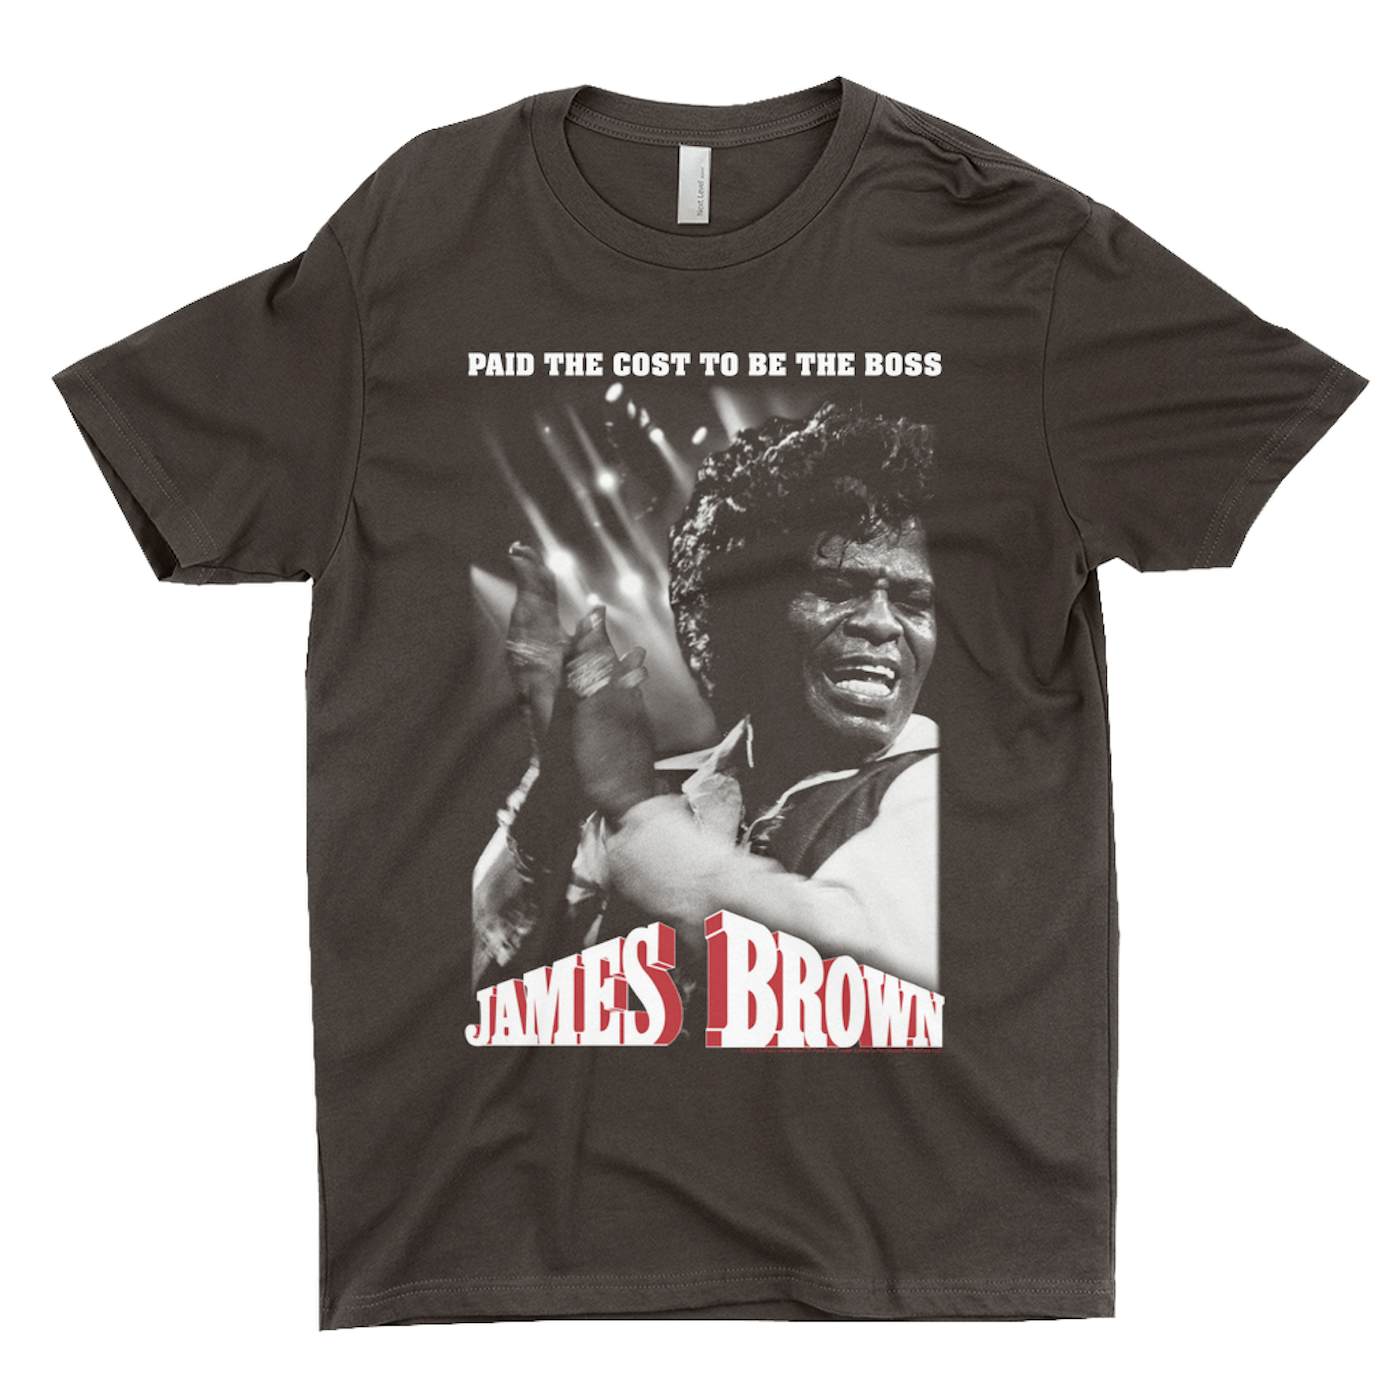 James Brown T-Shirt | Paid The Cost To The Boss James Brown Shirt